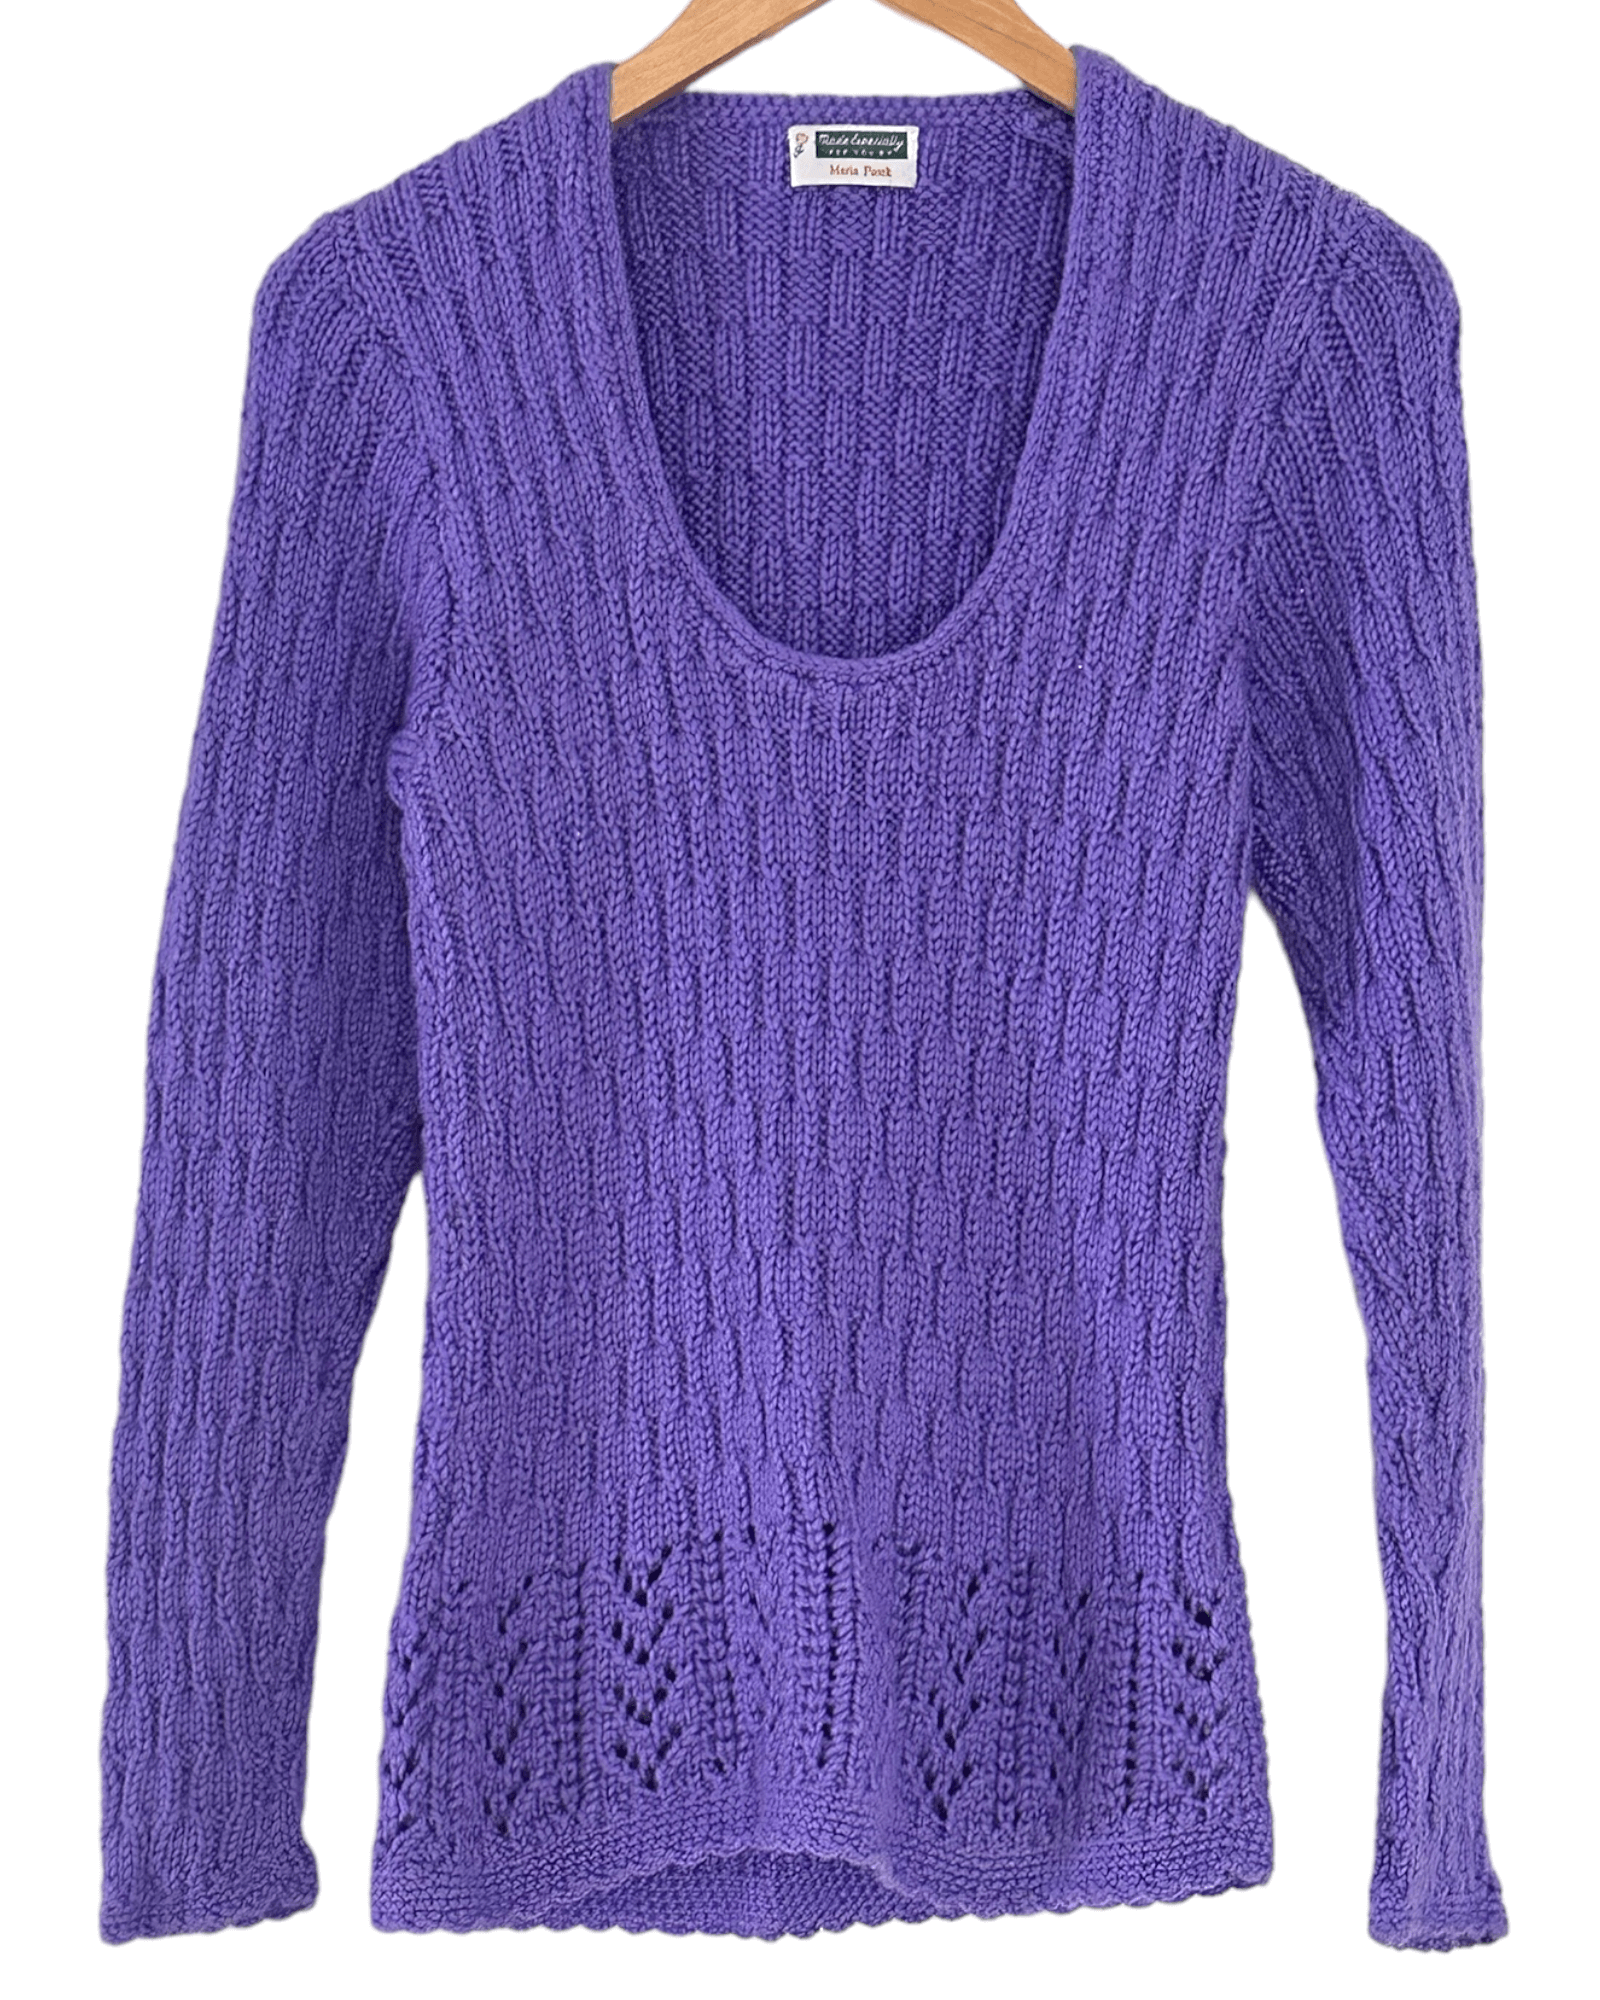 Light Summer lilac contrast knit scoop neck sweater